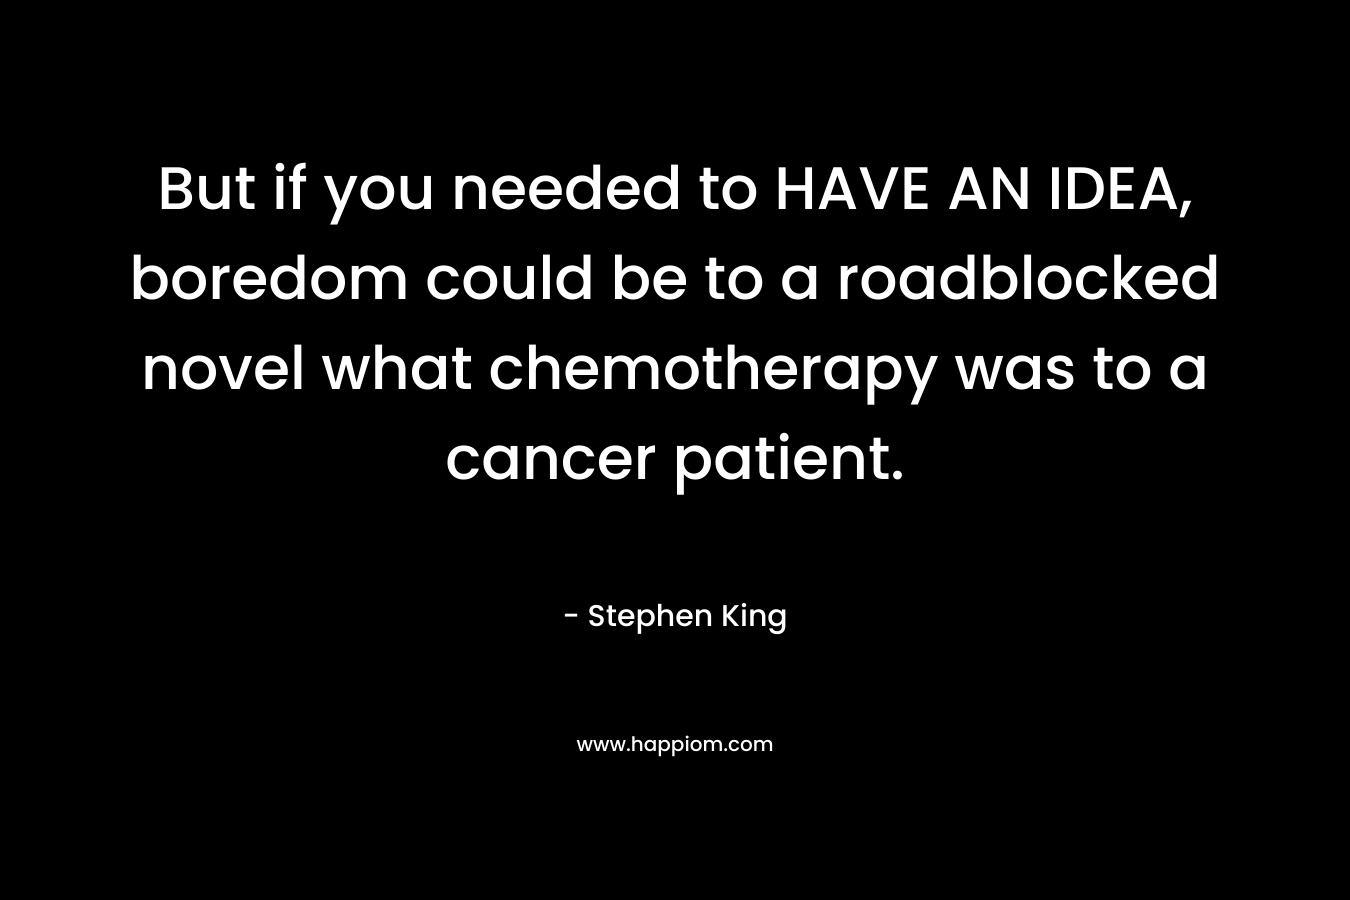 But if you needed to HAVE AN IDEA, boredom could be to a roadblocked novel what chemotherapy was to a cancer patient. – Stephen King